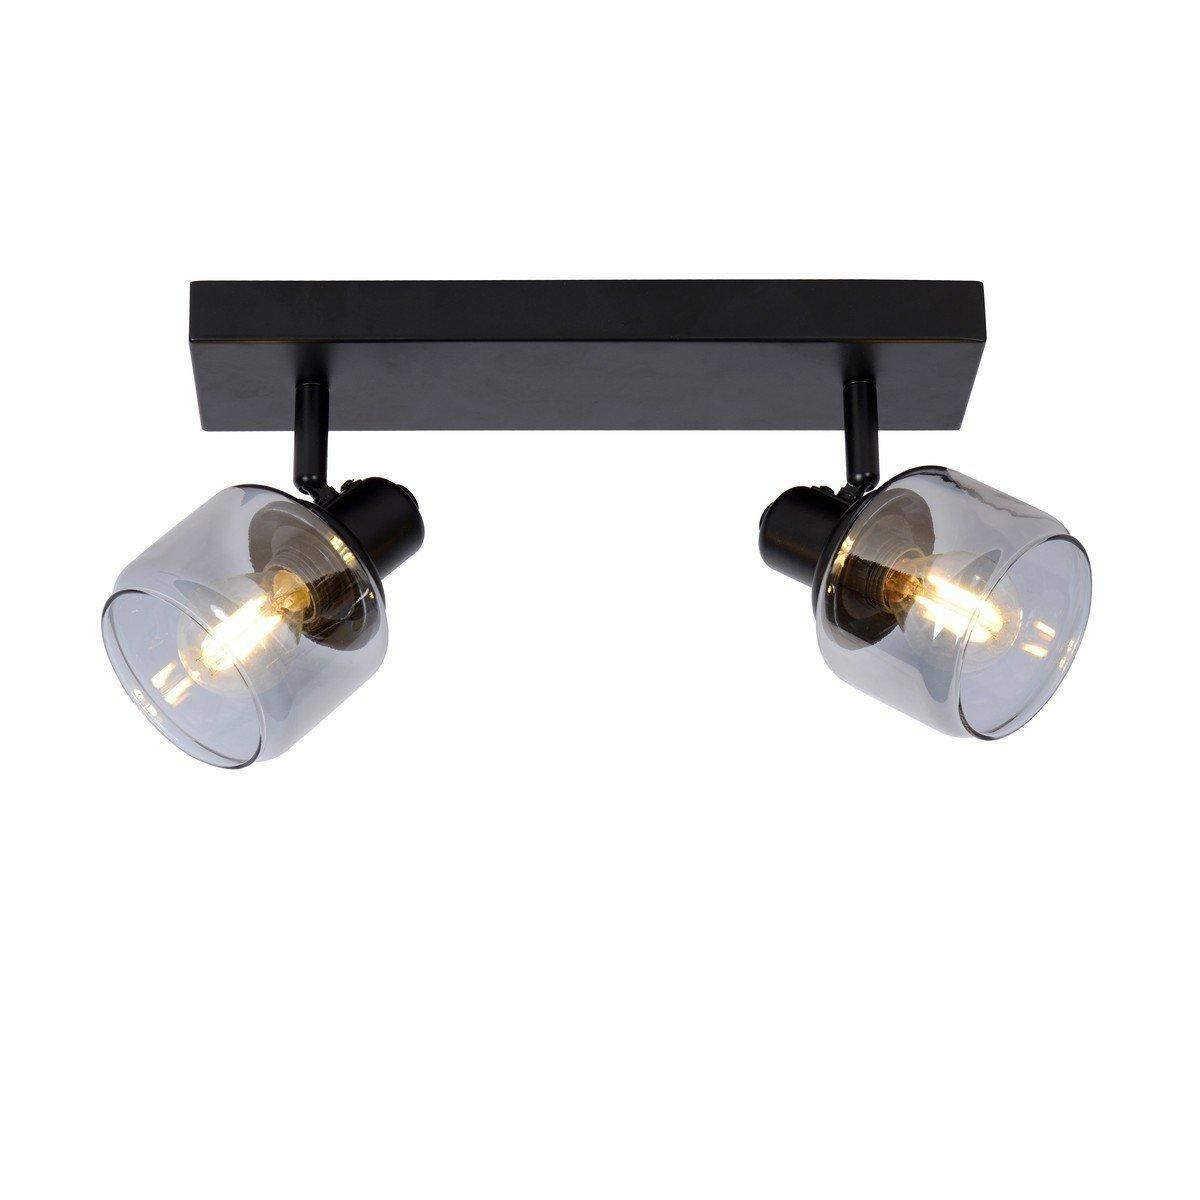 'BJORN' Dimmable Rotatable Stylish Indoor Twin Ceiling Spotlight 2xE14 - image 1